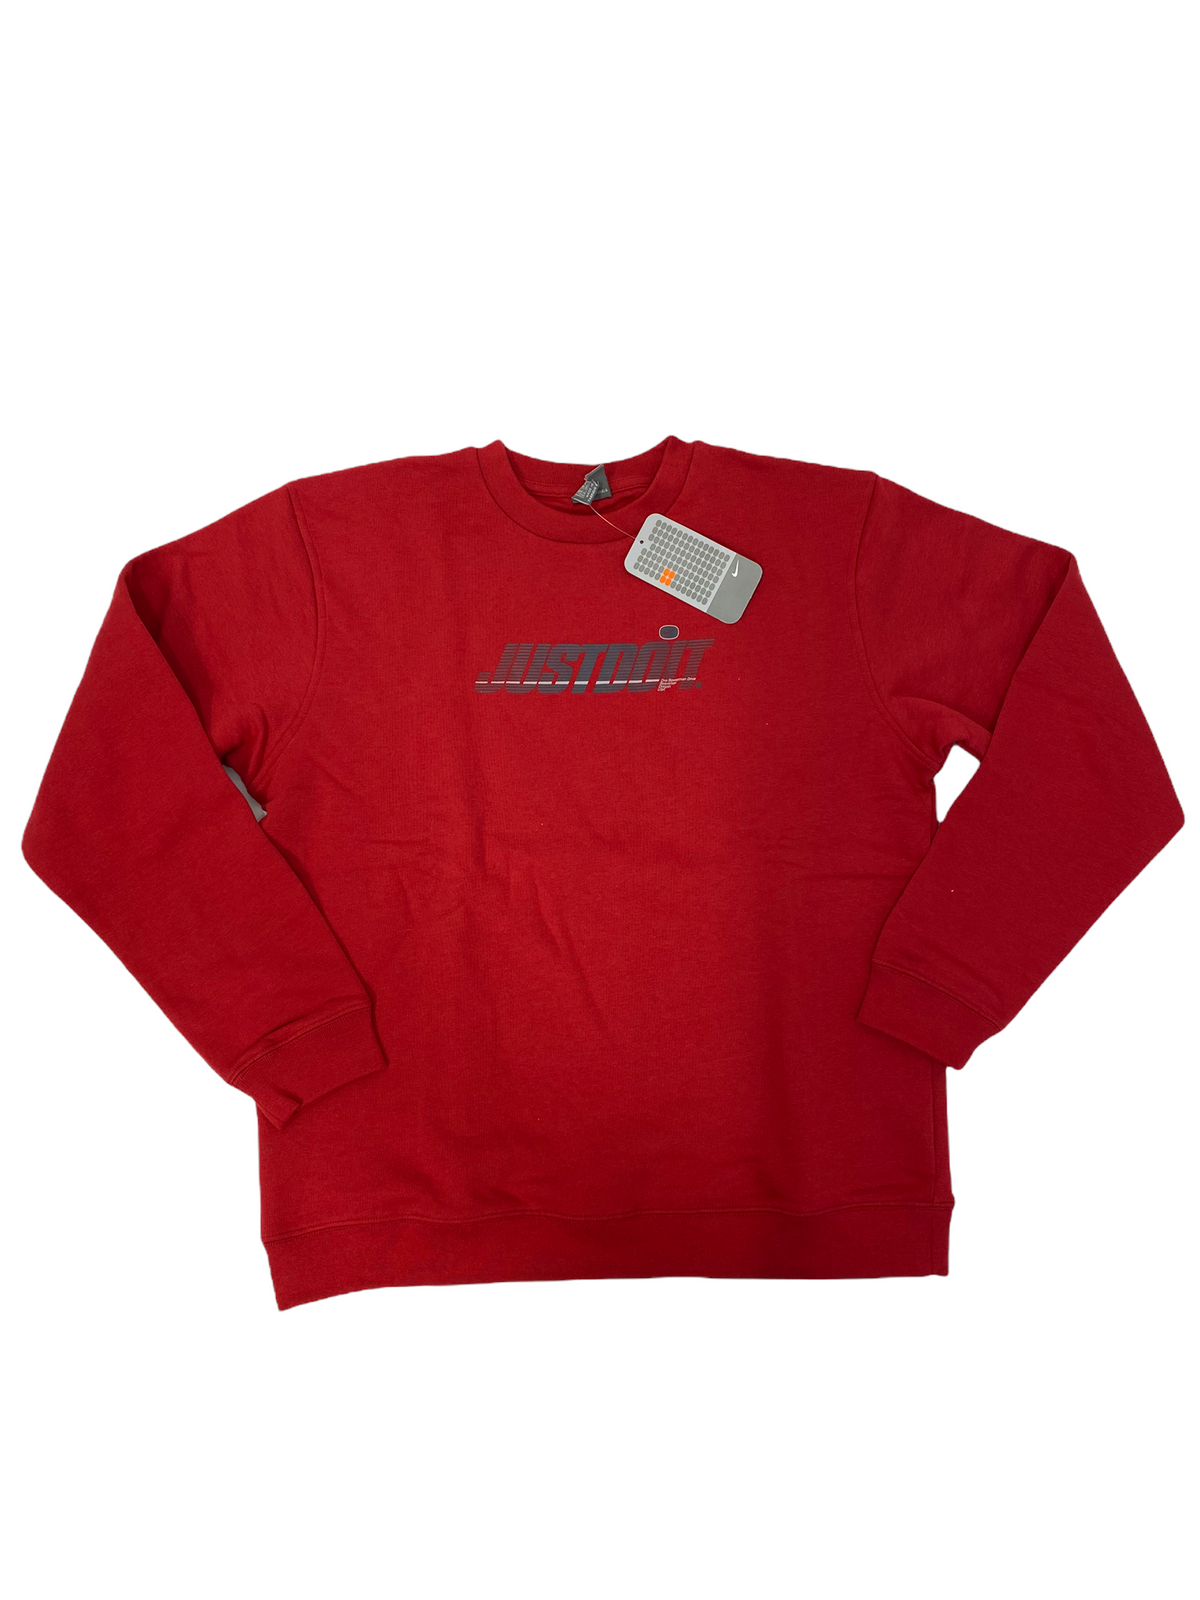 VINTAGE NIKE JUST DO IT GRAPHIC PRINT SWEATER IN RED - Not In Your Wardrobe™ - [Vendor]